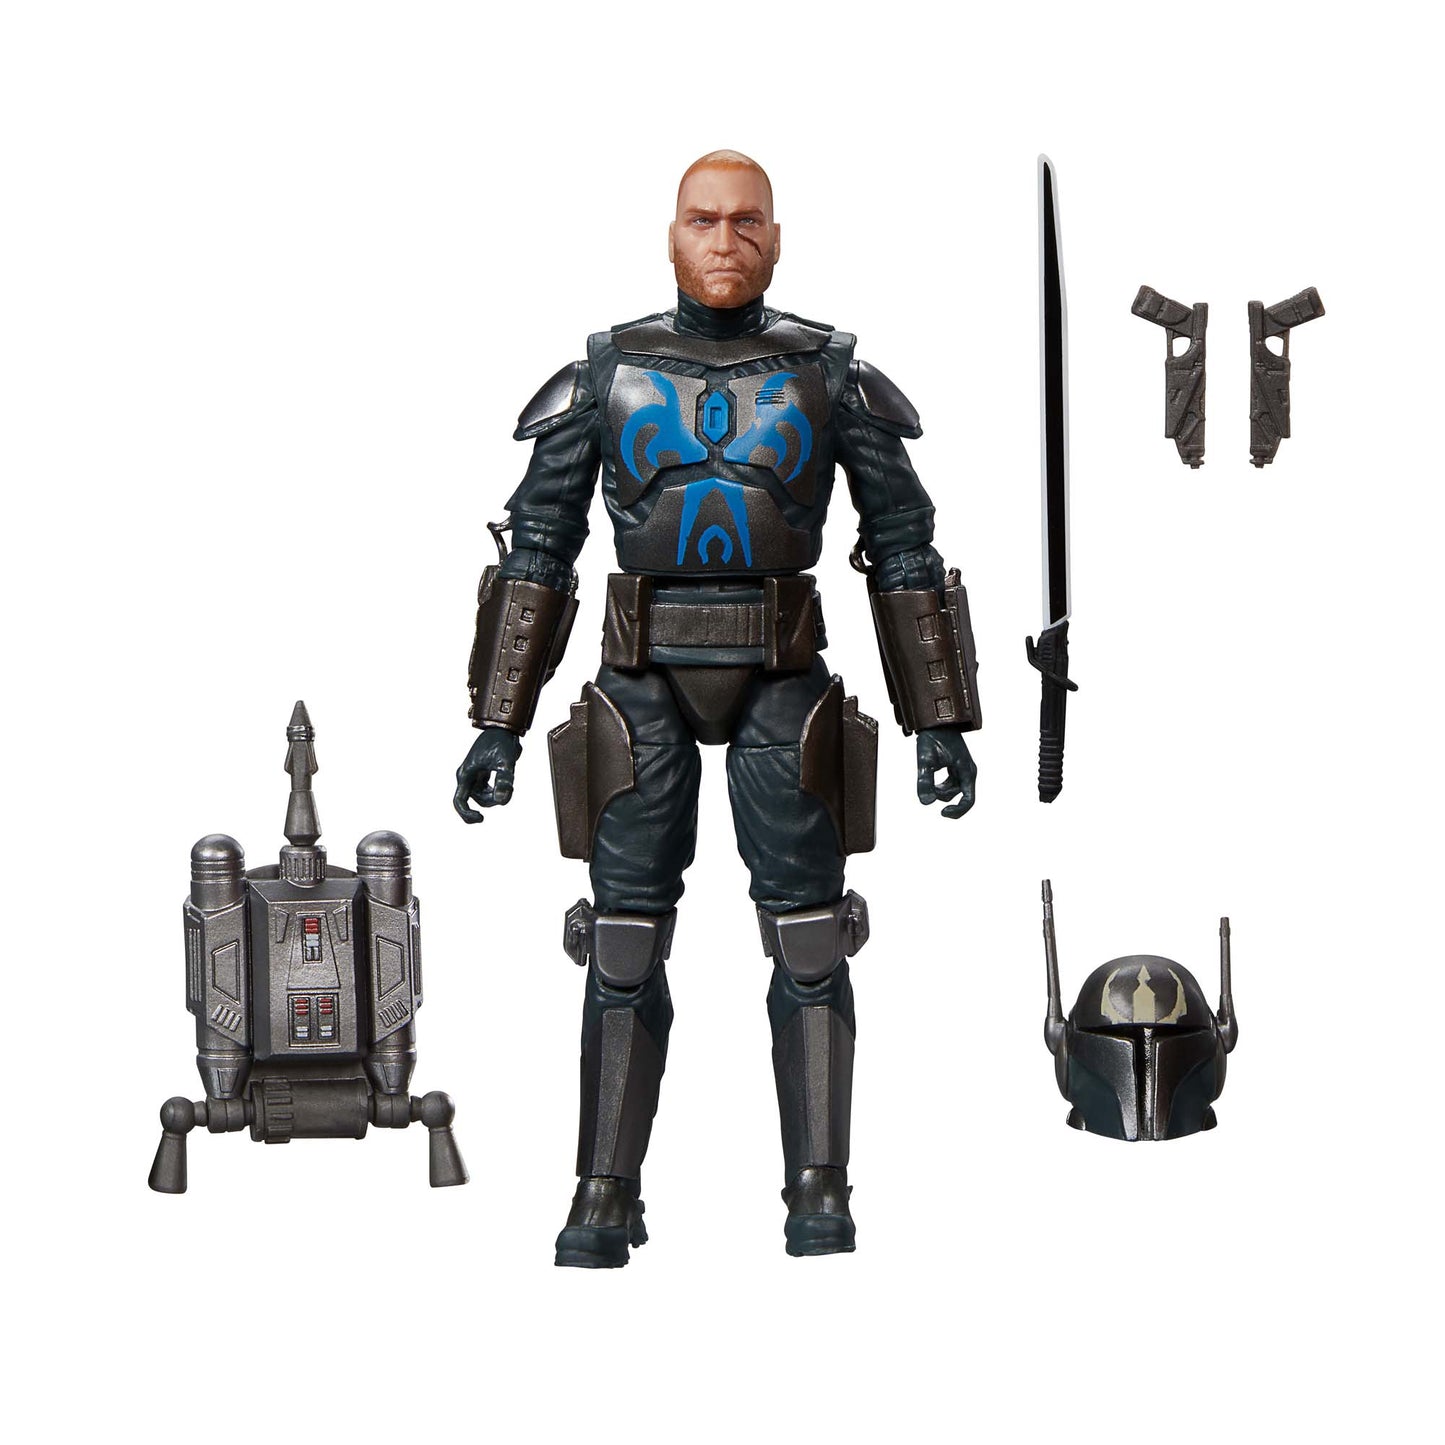 Star Wars The Black Series Pre Vizsla Action Figure Toy with accessories - Heretoserveyou